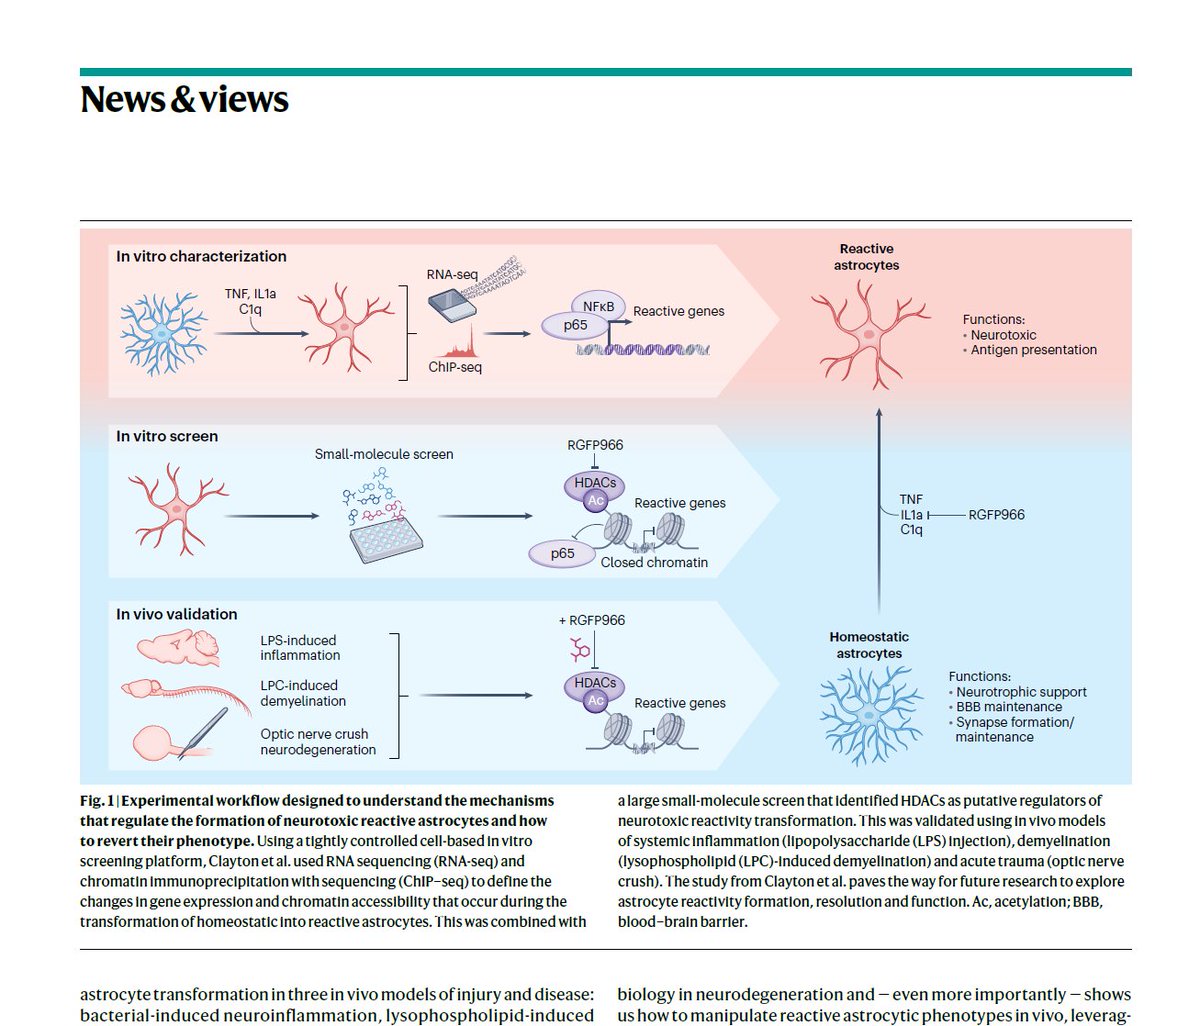 Great work by @bllclayton, @TesarLab, & the team. Such an insightful dive into modulation of astrocyte reactivity. @ScienceLemon92 and I were honored to write the @NatureNeuro N&V on this piece - see rdcu.be/dzXrM. (1/2)